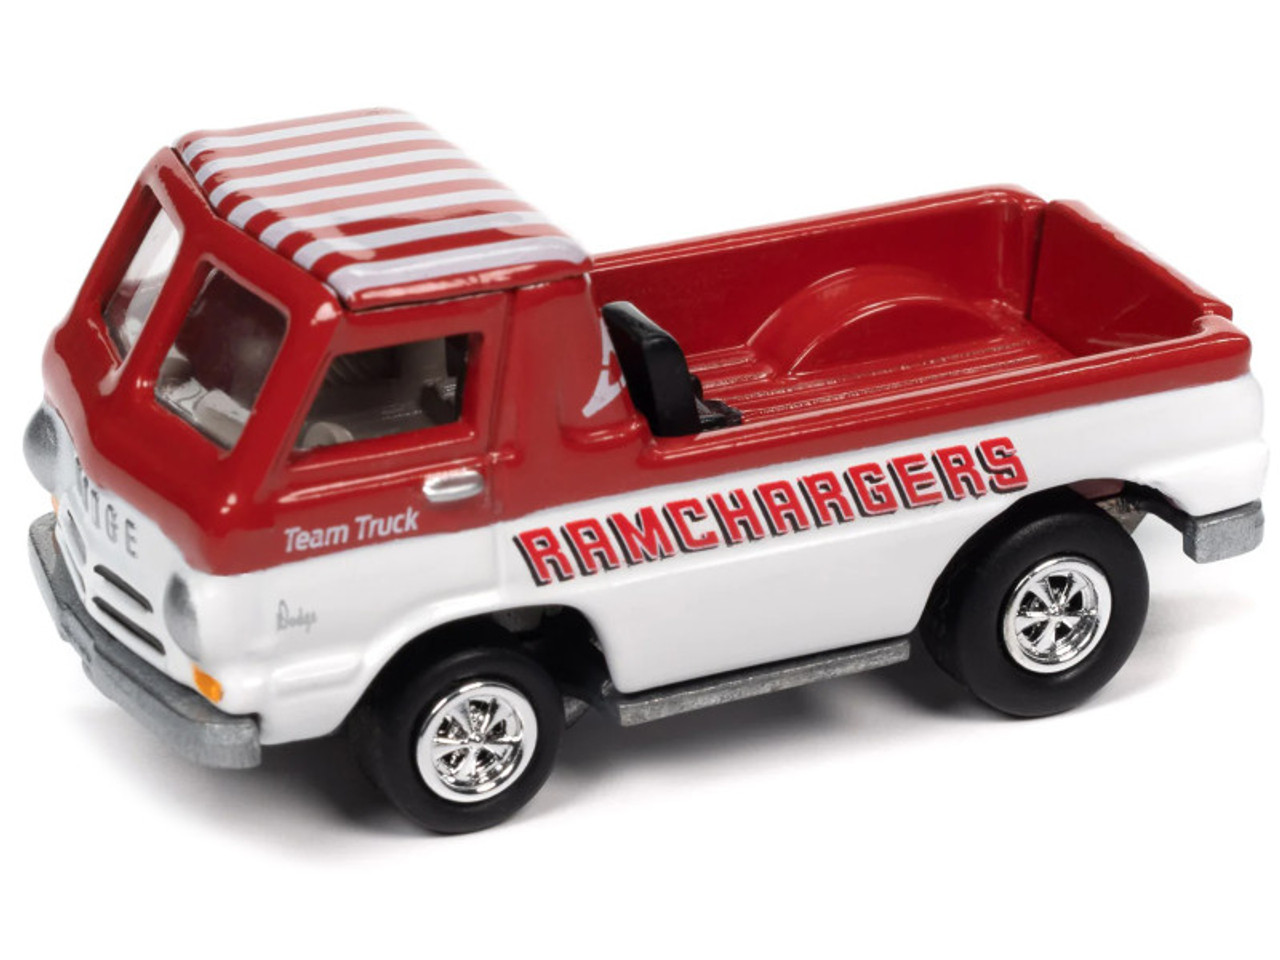 1965 Dodge A-100 Pickup Truck Red and White with Enclosed Car Trailer "Ramchargers" "Tow & Go" Series Limited Edition to 3744 pieces Worldwide 1/64 Diecast Model Car by Johnny Lightning